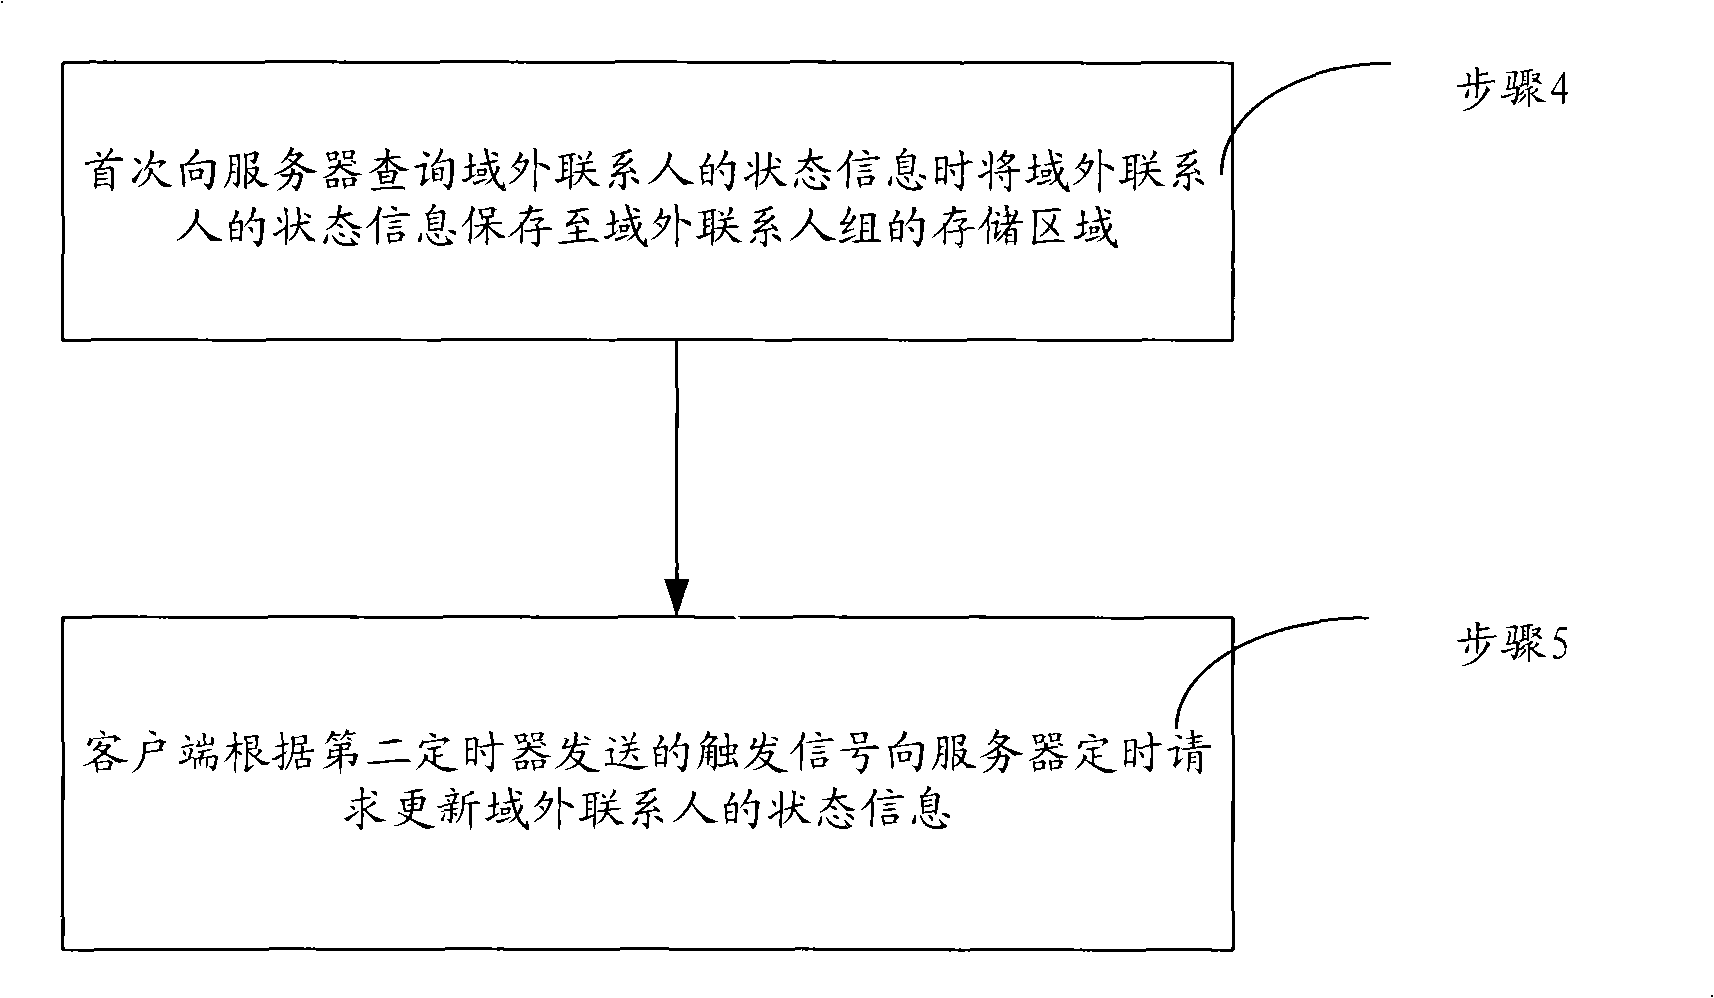 Instant communication system and method for updating contact information